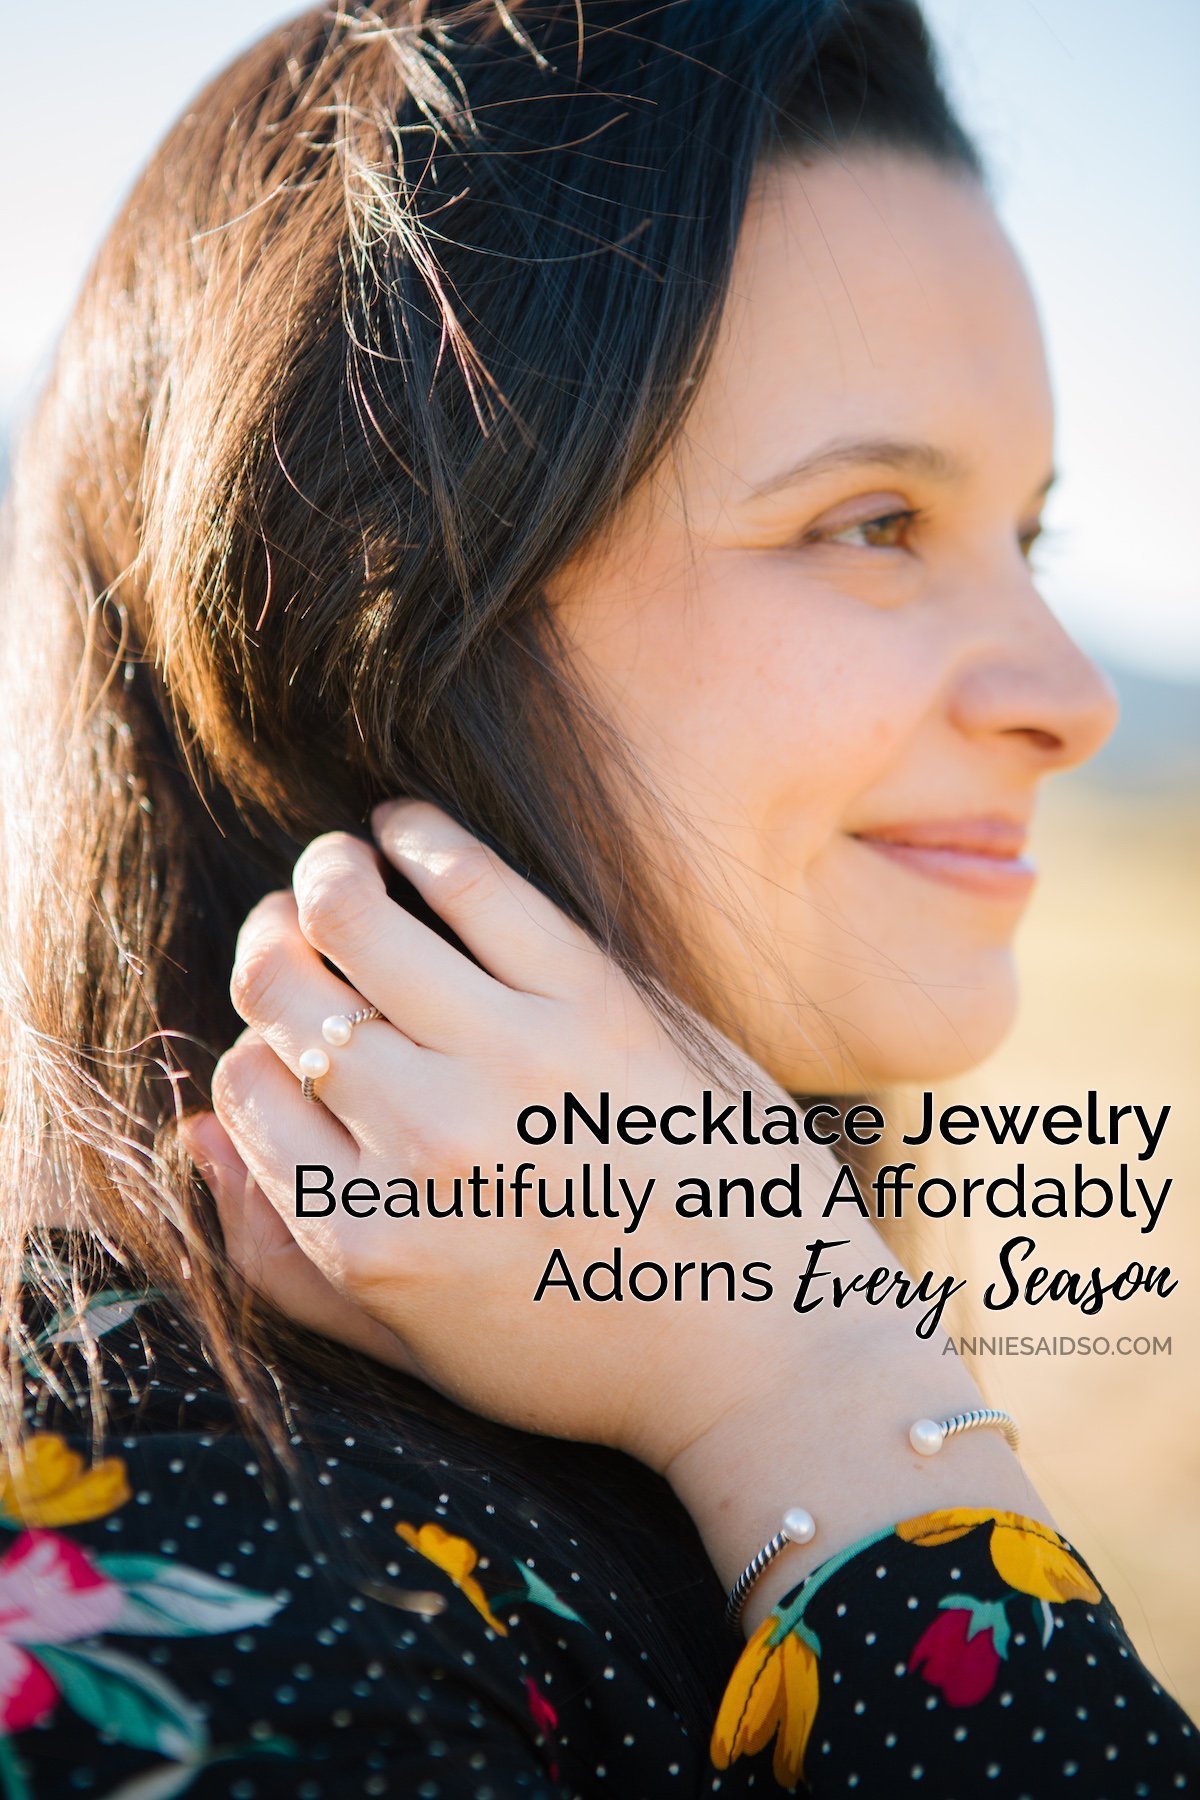 oNecklace Jewelry Beautifully and Affordably Adorns Every Season